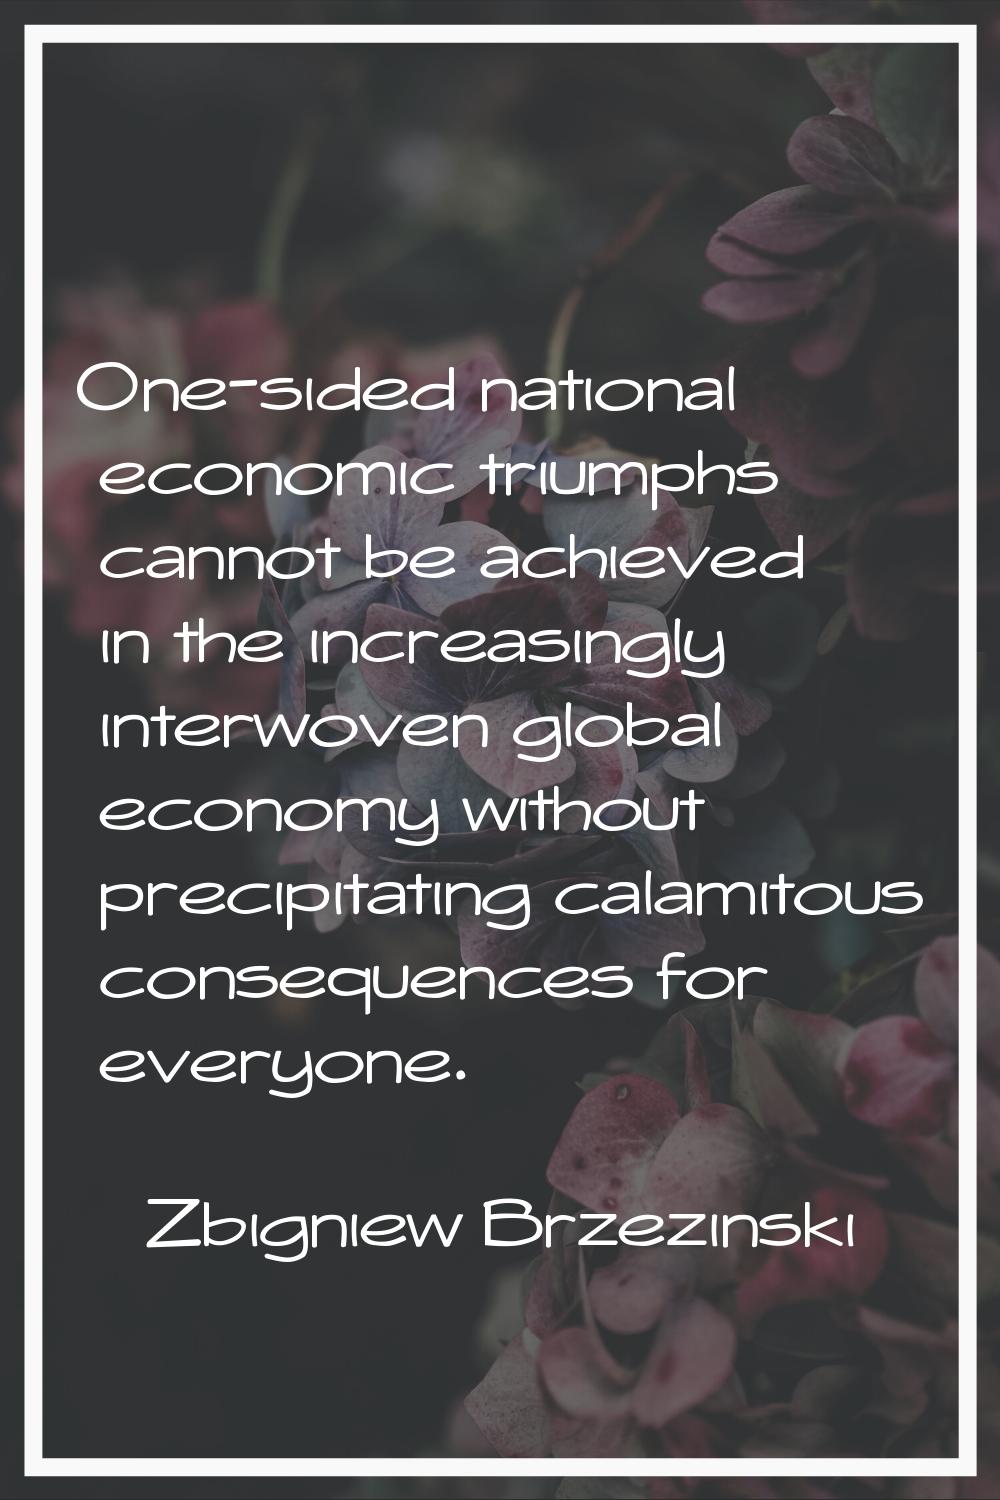 One-sided national economic triumphs cannot be achieved in the increasingly interwoven global econo